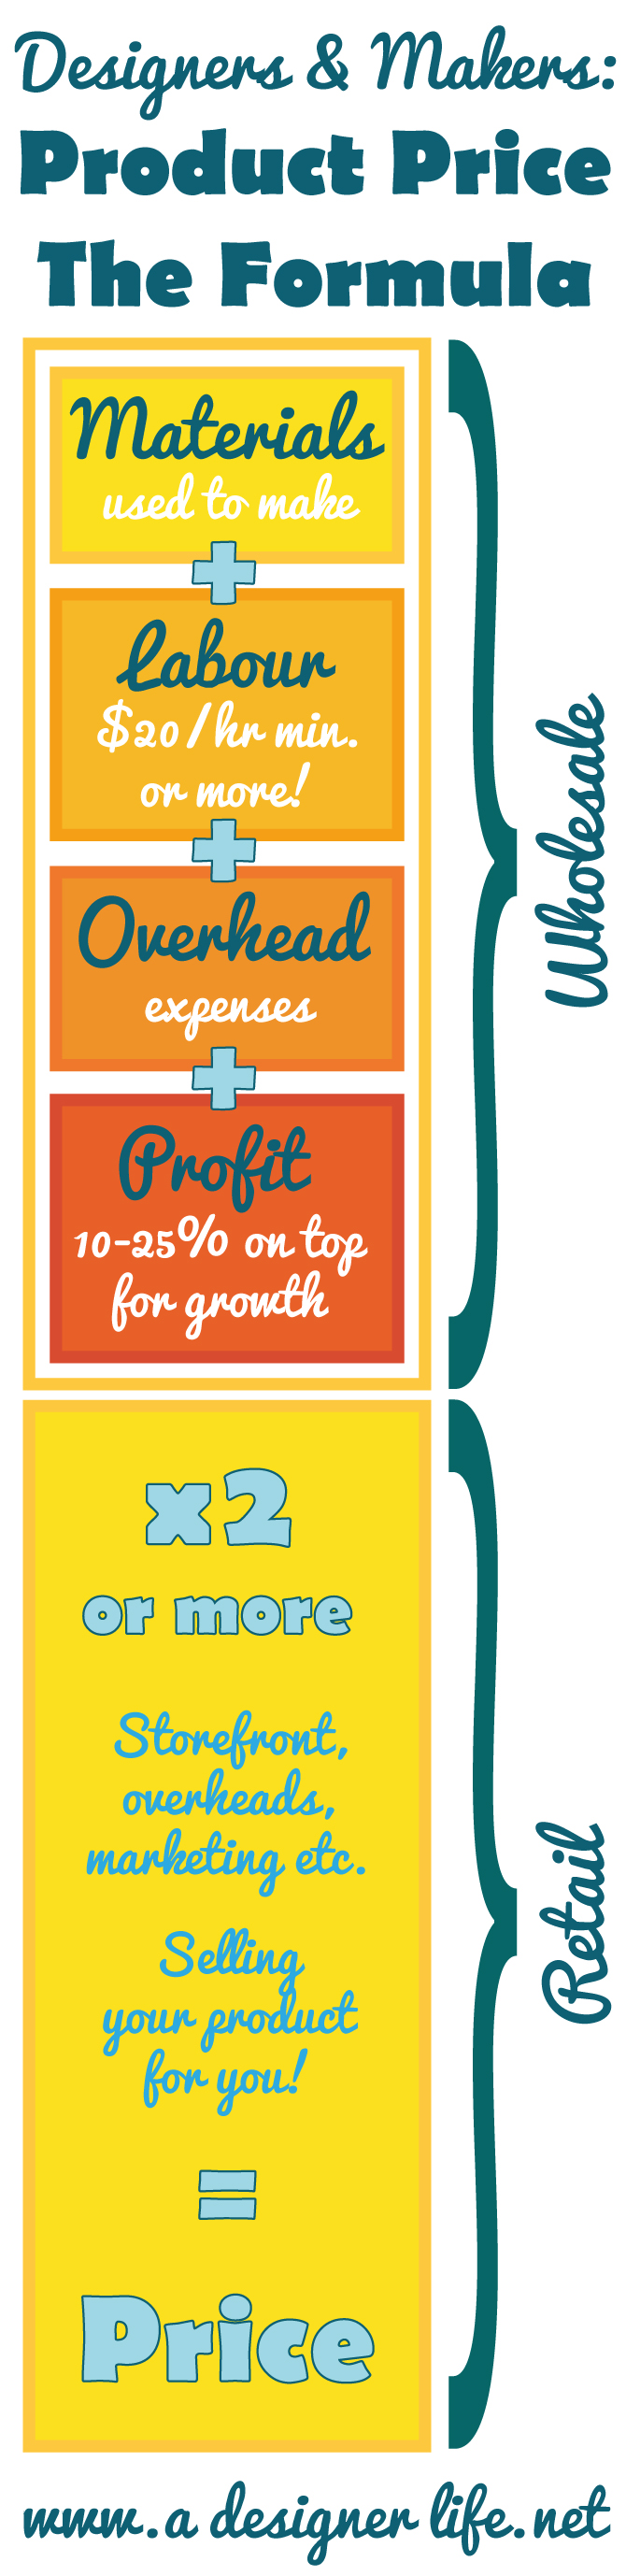 How do I price my product? The ultimate product pricing formula for designers and makers